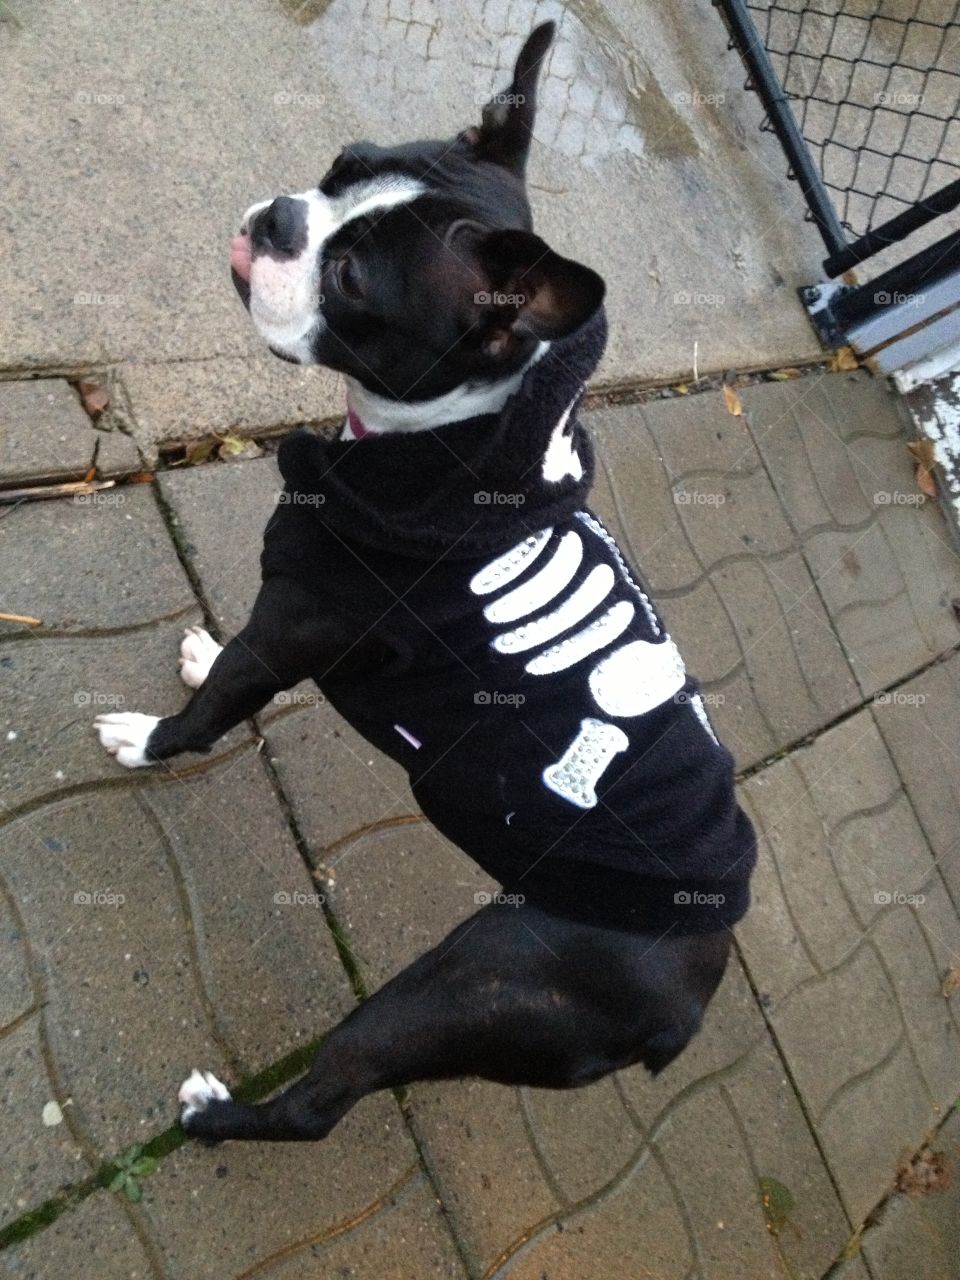 Halloween outfit for the cutest dog